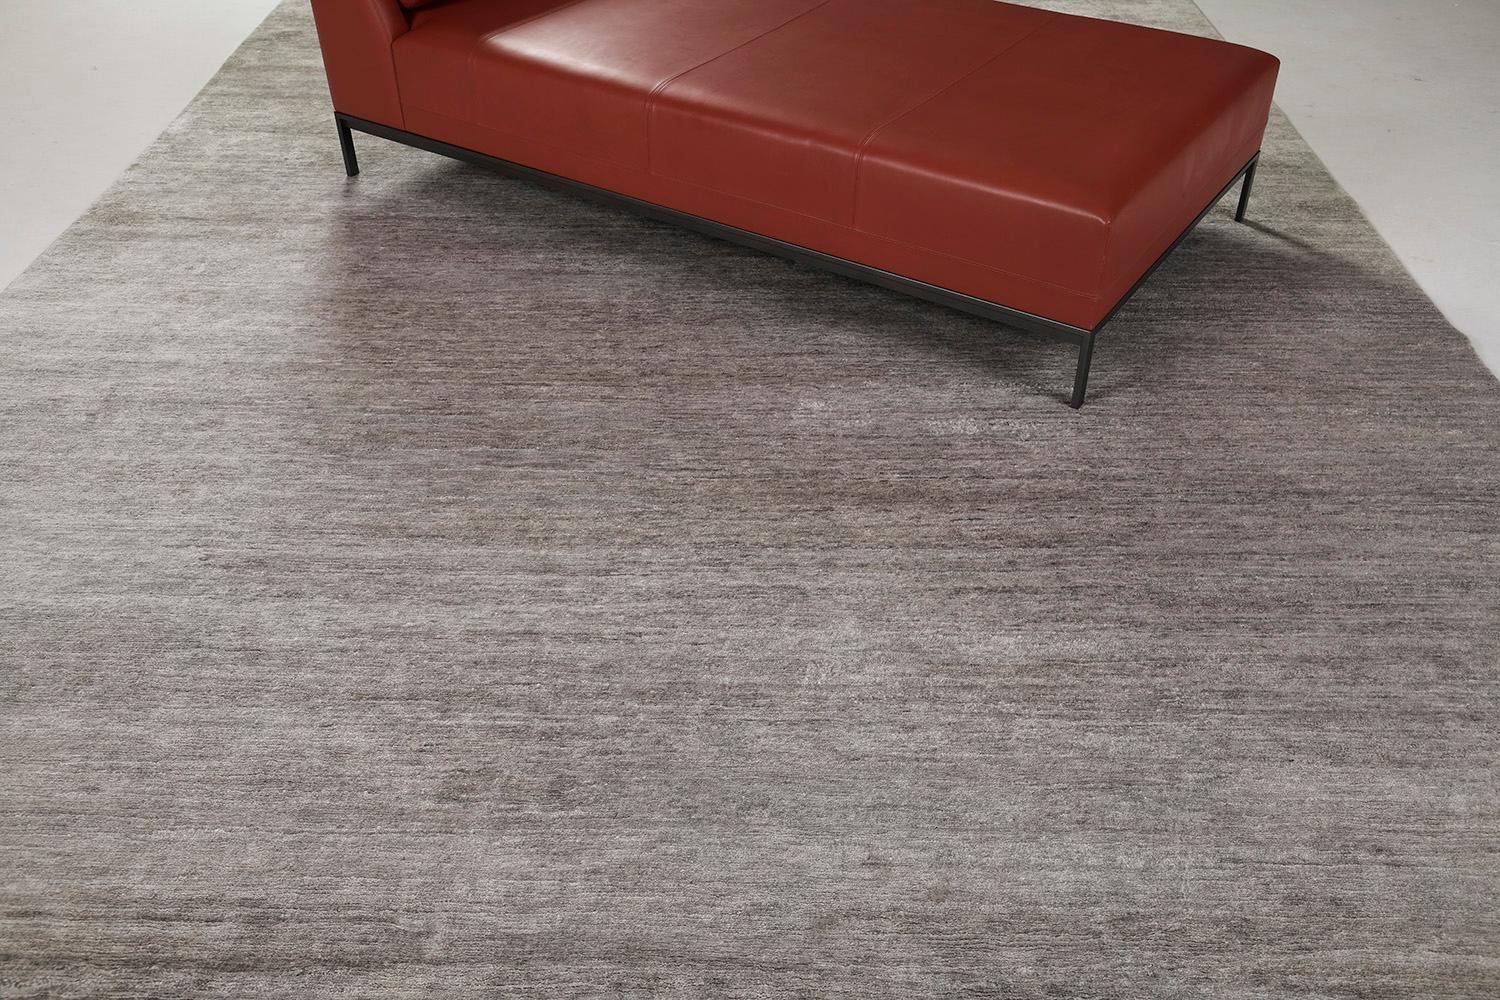 Dara' is a sought-after rug in Elan Collection in the mesmerizing shade of neutral light gray. Its simplicity does not take away from the rug's luxurious quality and beautiful sheen made of bamboo silk. Dara is a fabulous rug for any design